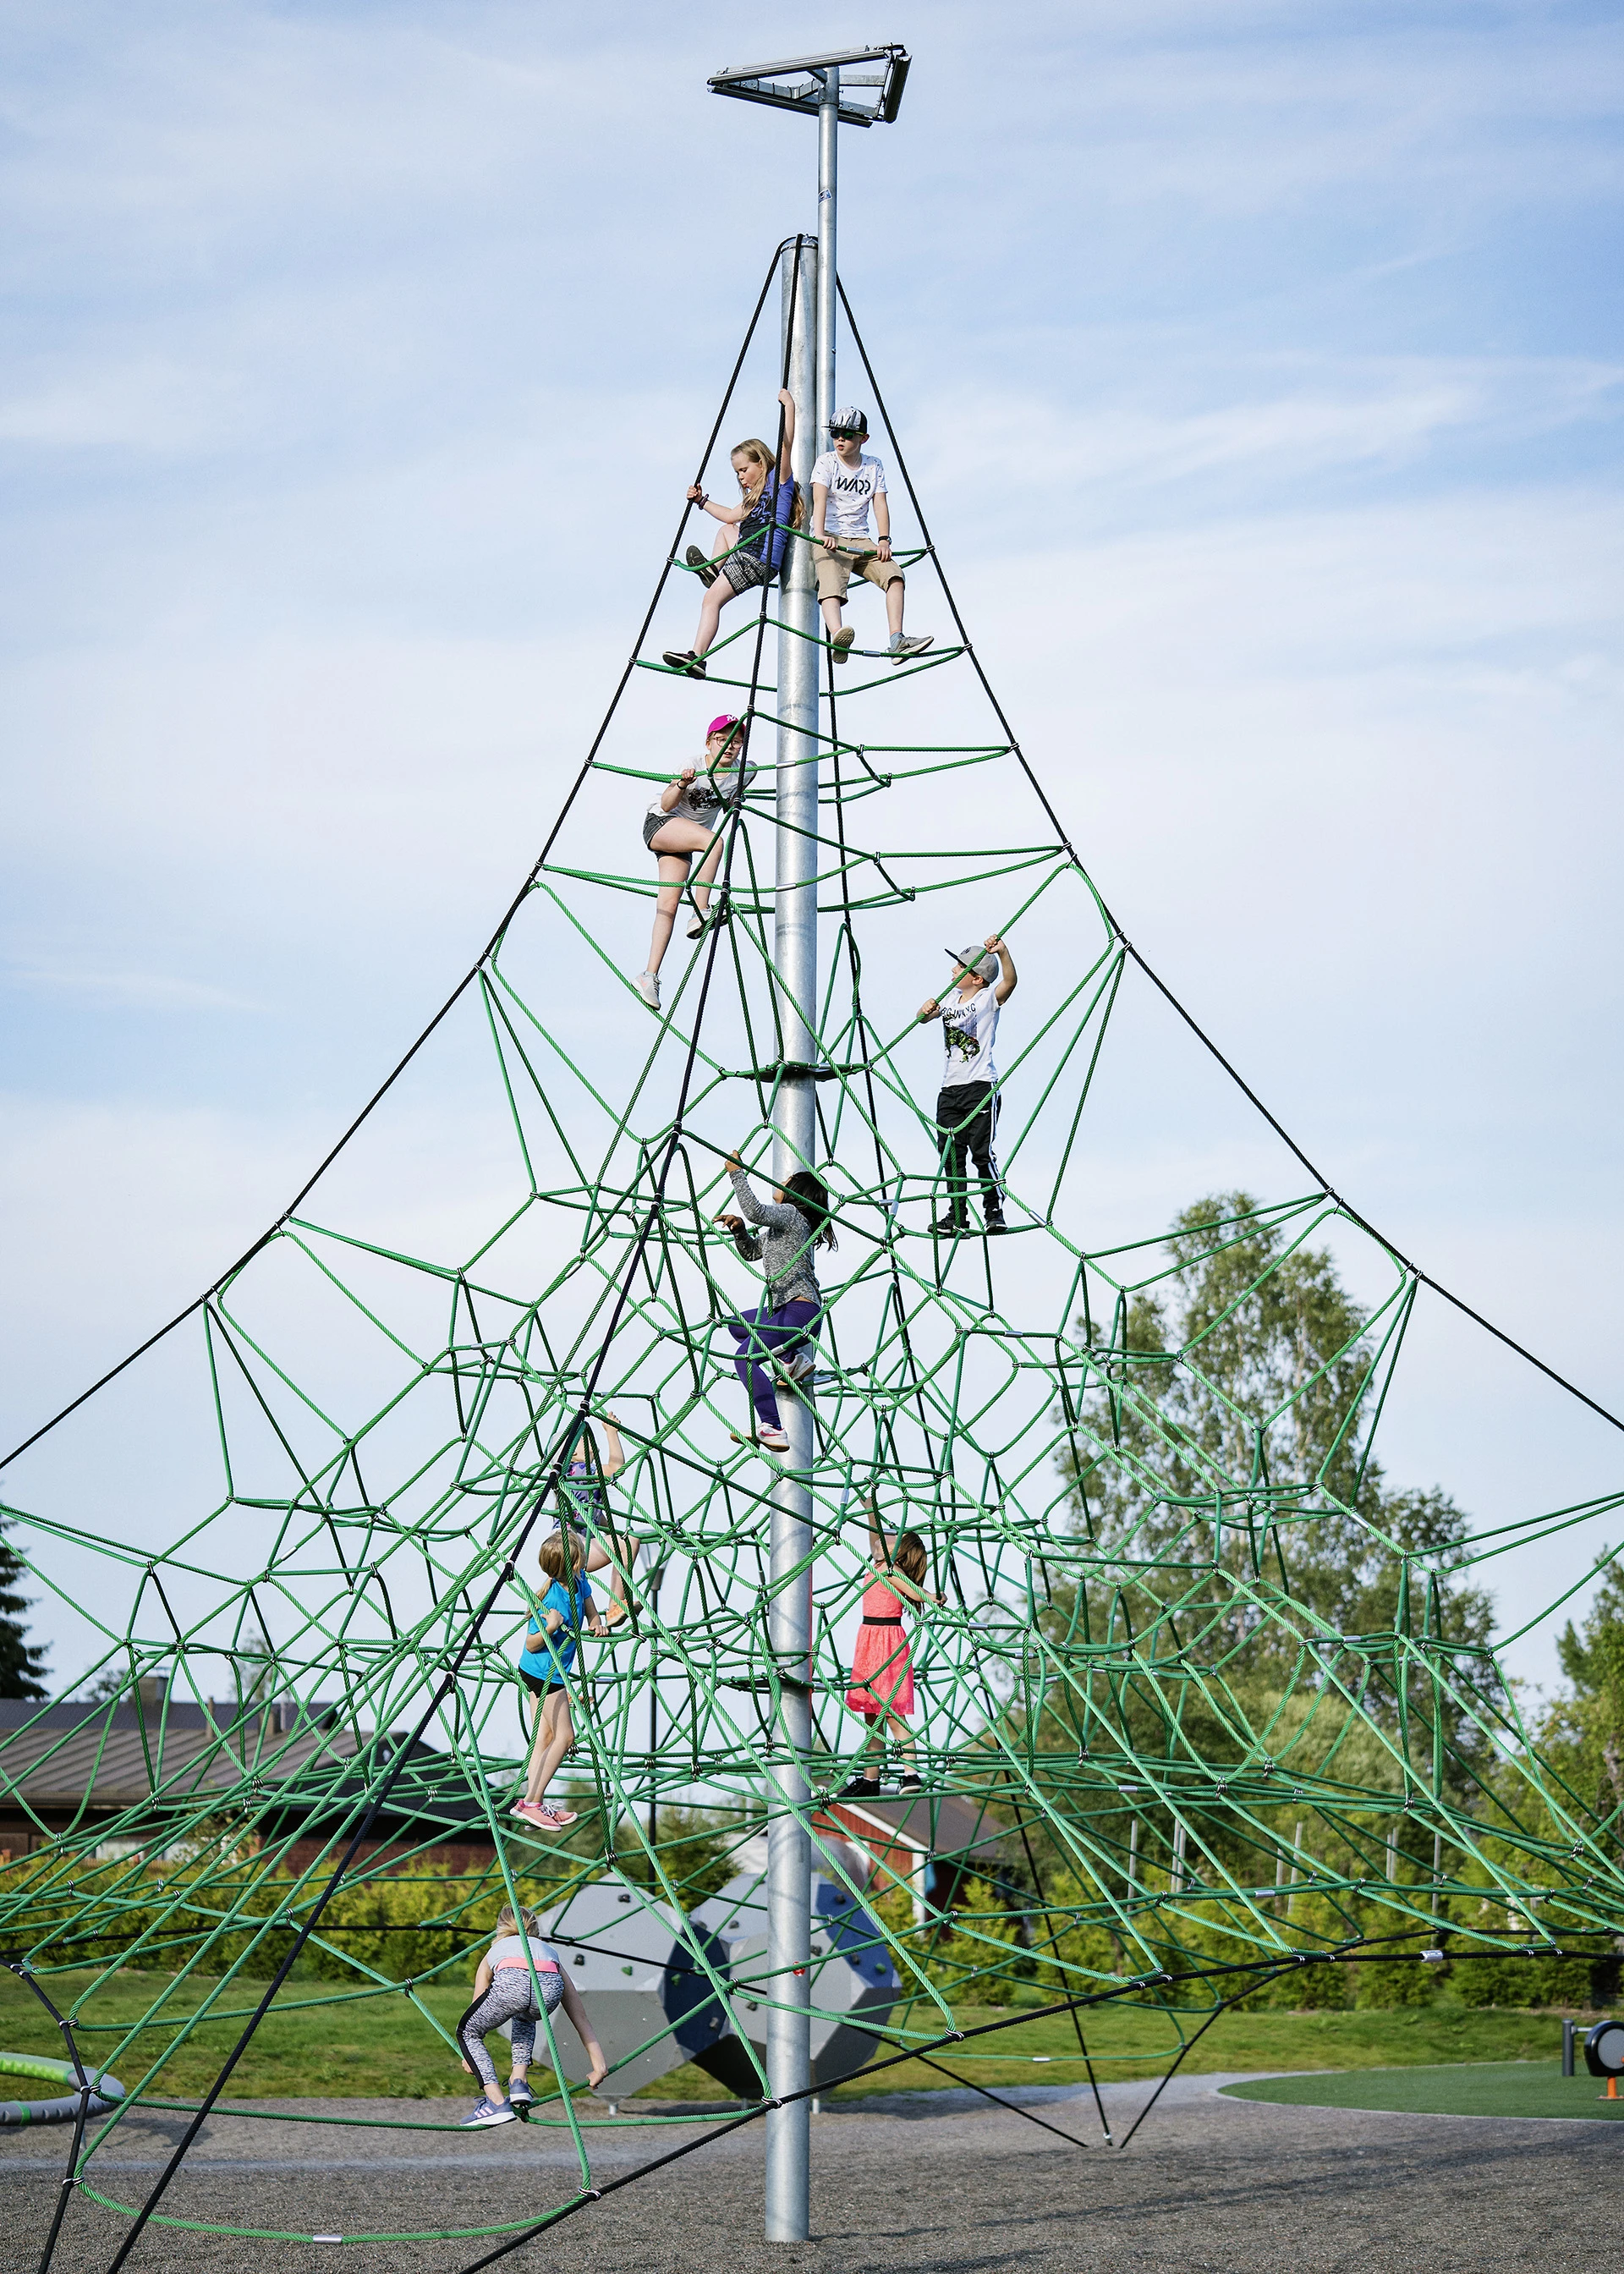 A group of children climbing a tall rope play structure